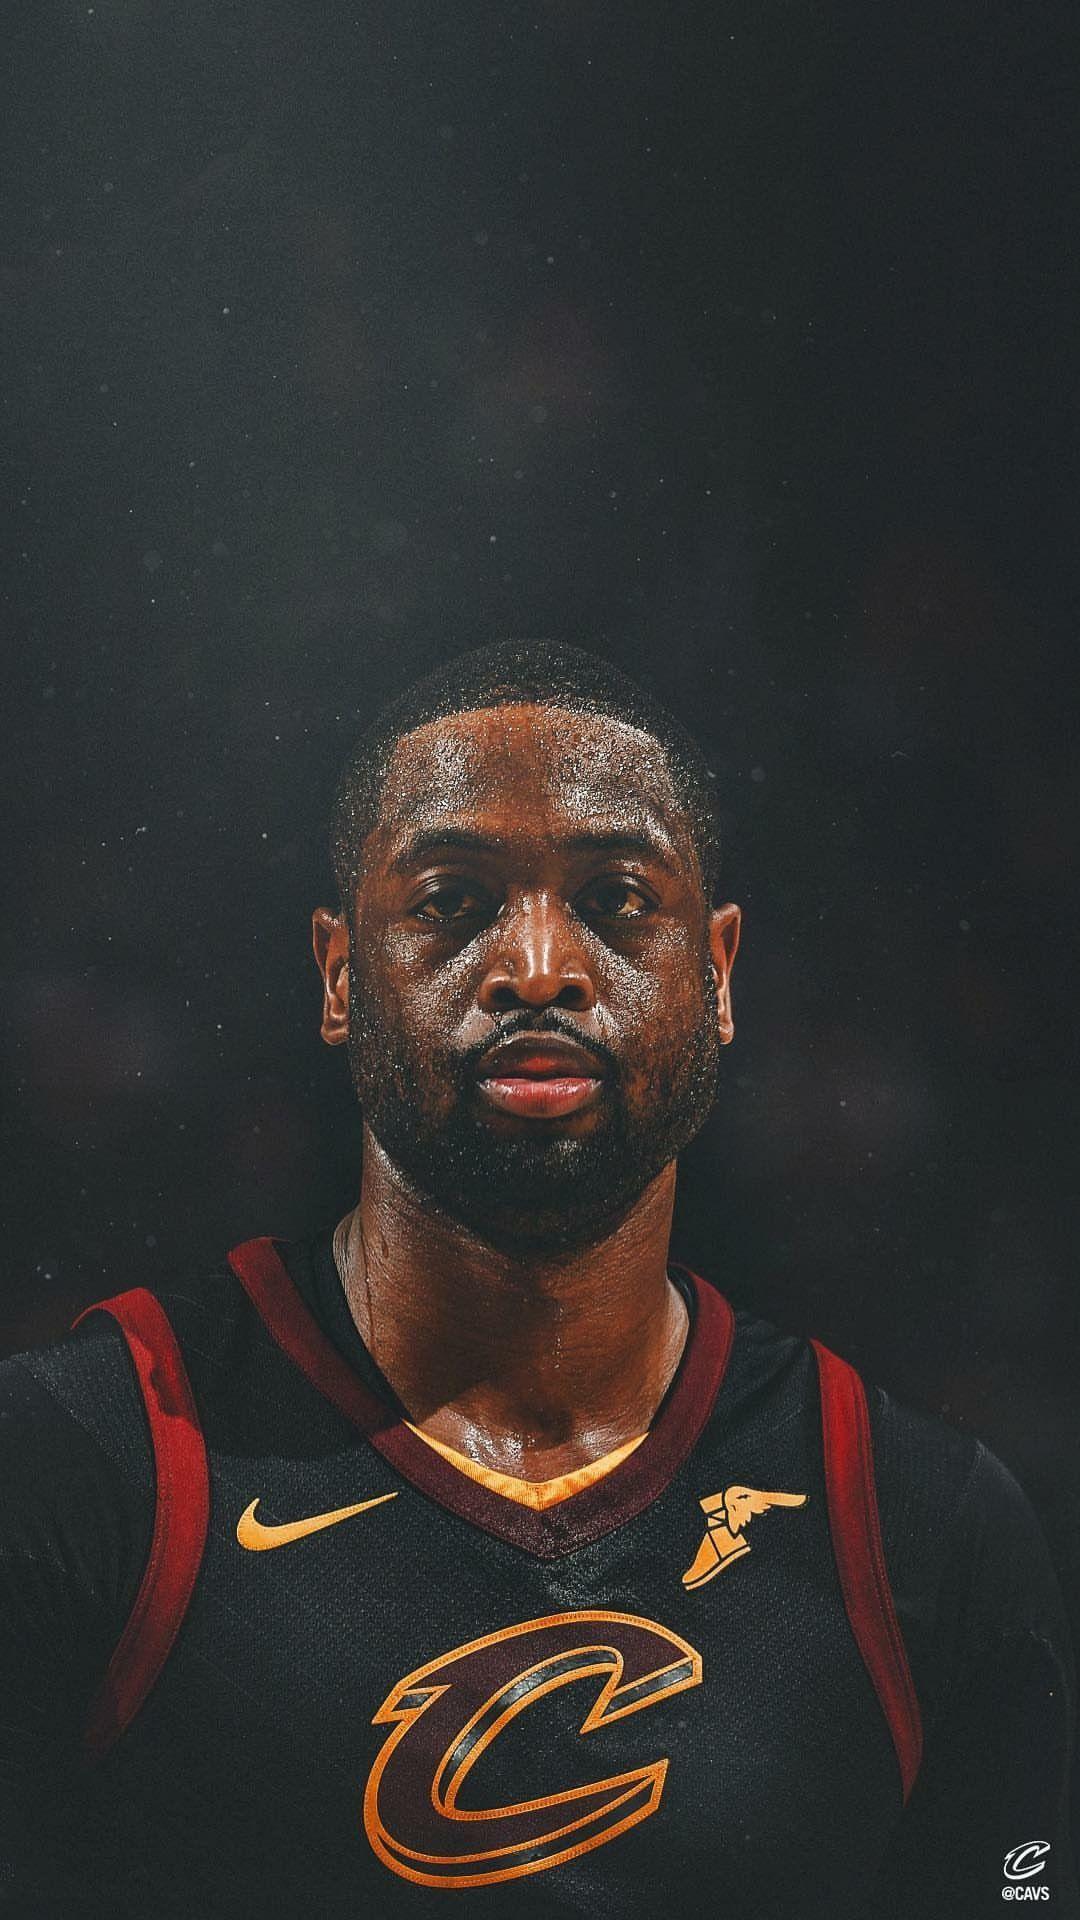 I threw together a retro wallpaper with dwayne wade as the subject feel  free to leave feedback  rheat